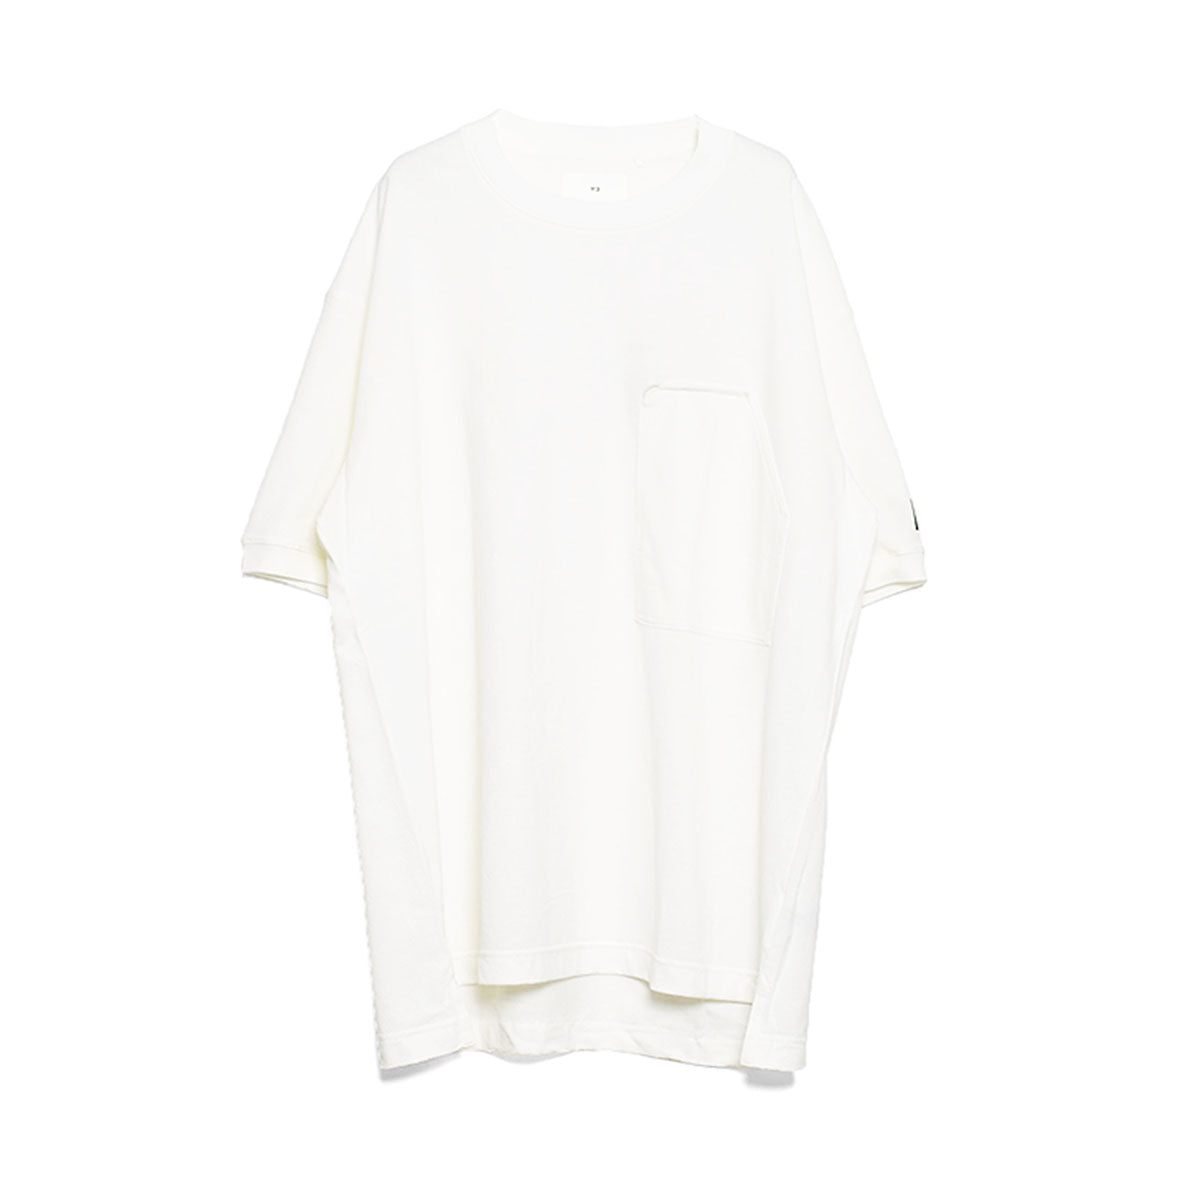 Y-3]WRKWR TEE/OFF WHITE(HZ8842-APPS23) – R&Co.